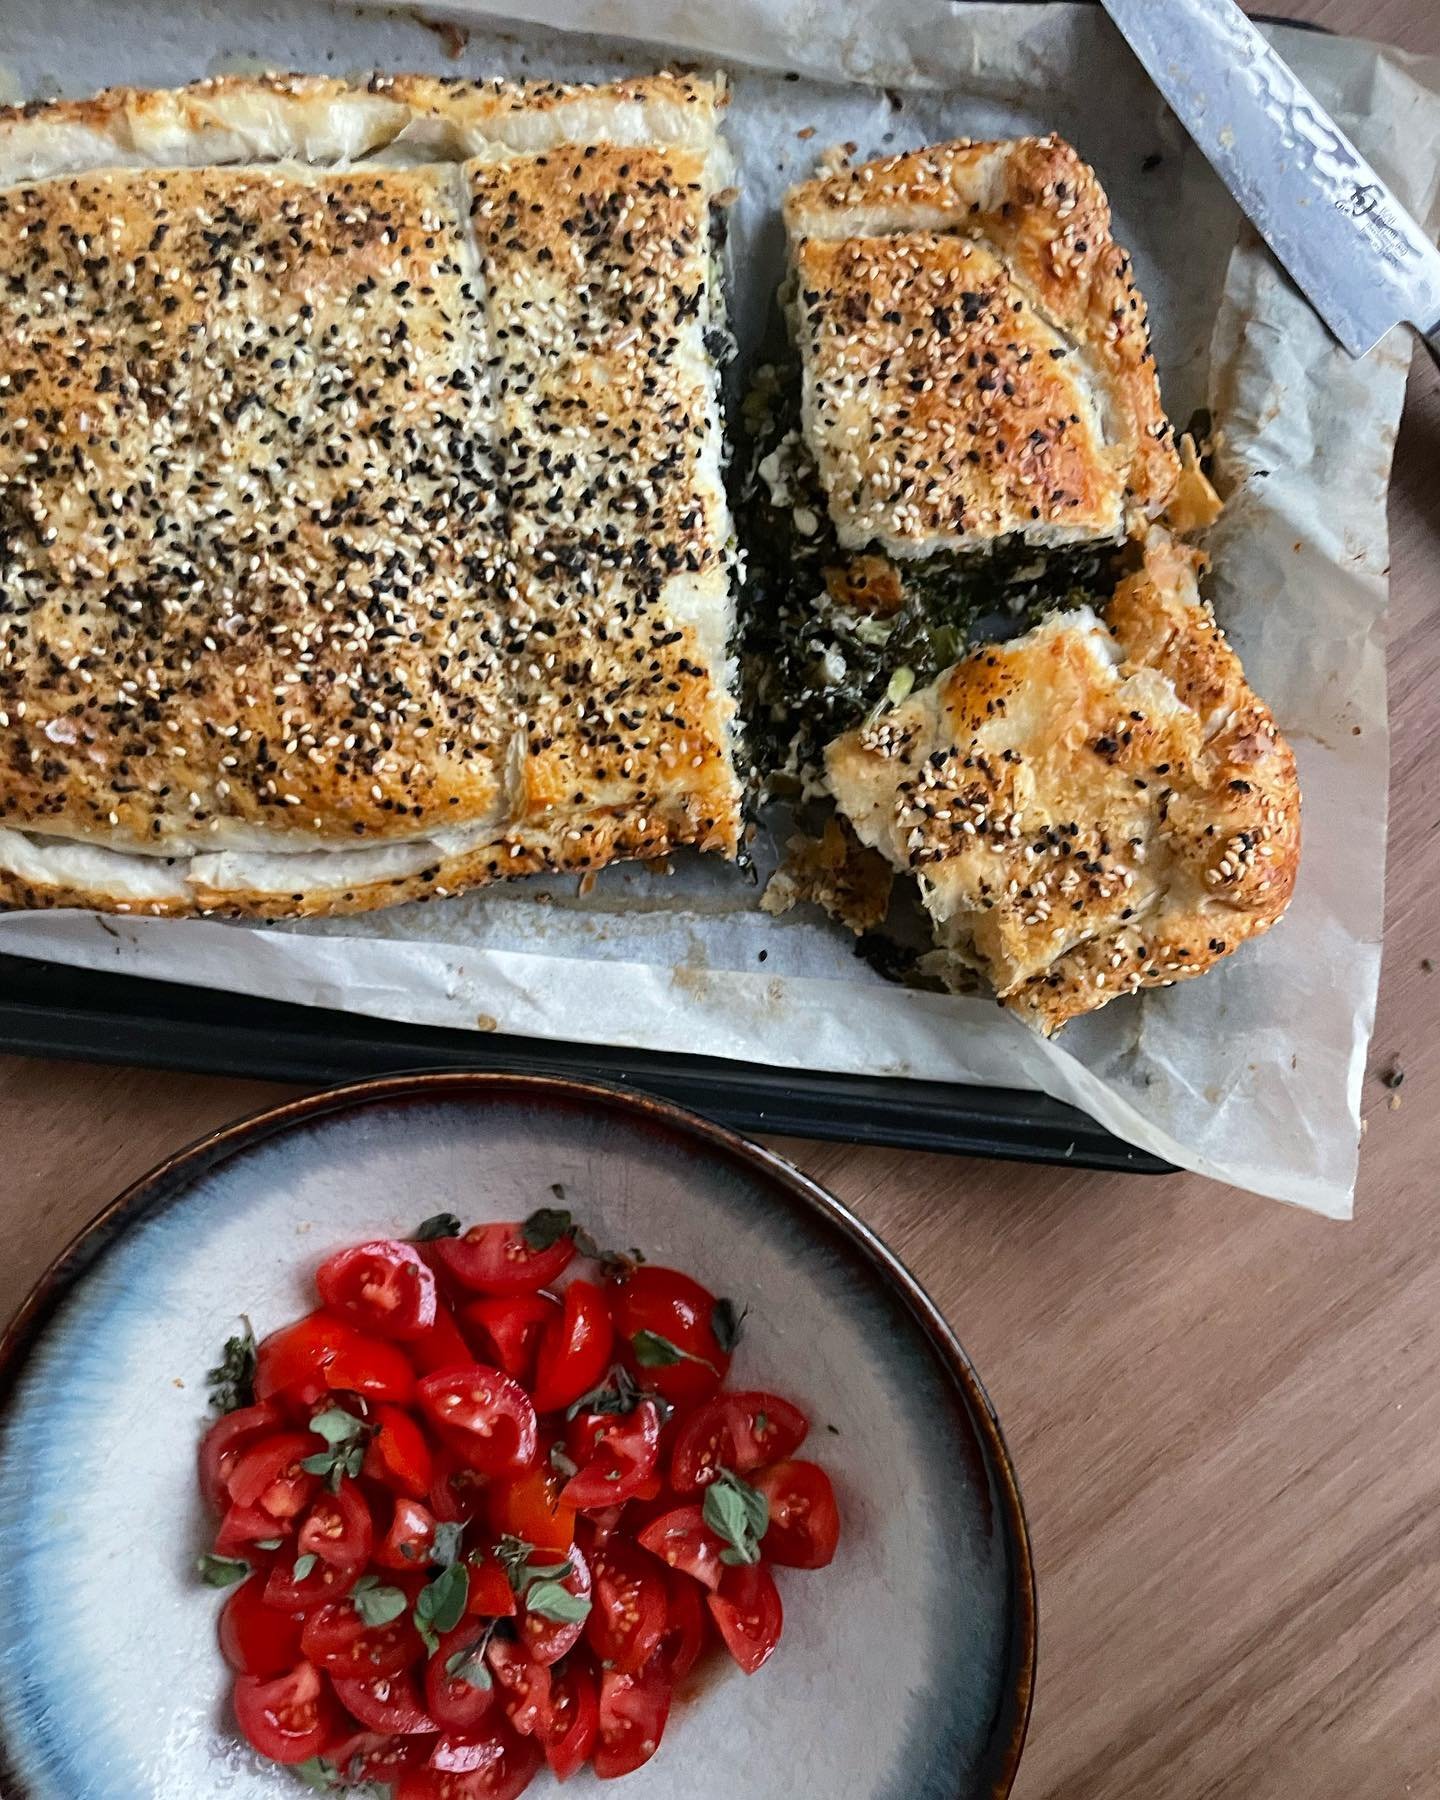 A very rustic slab pie, an easy way to finish off any veggies lying around at the end of the week. 

This one had all the greens, herbs, caramelised onion and ricotta. 

I always have some random puff pastry lying around in the freezer. Sandwich your